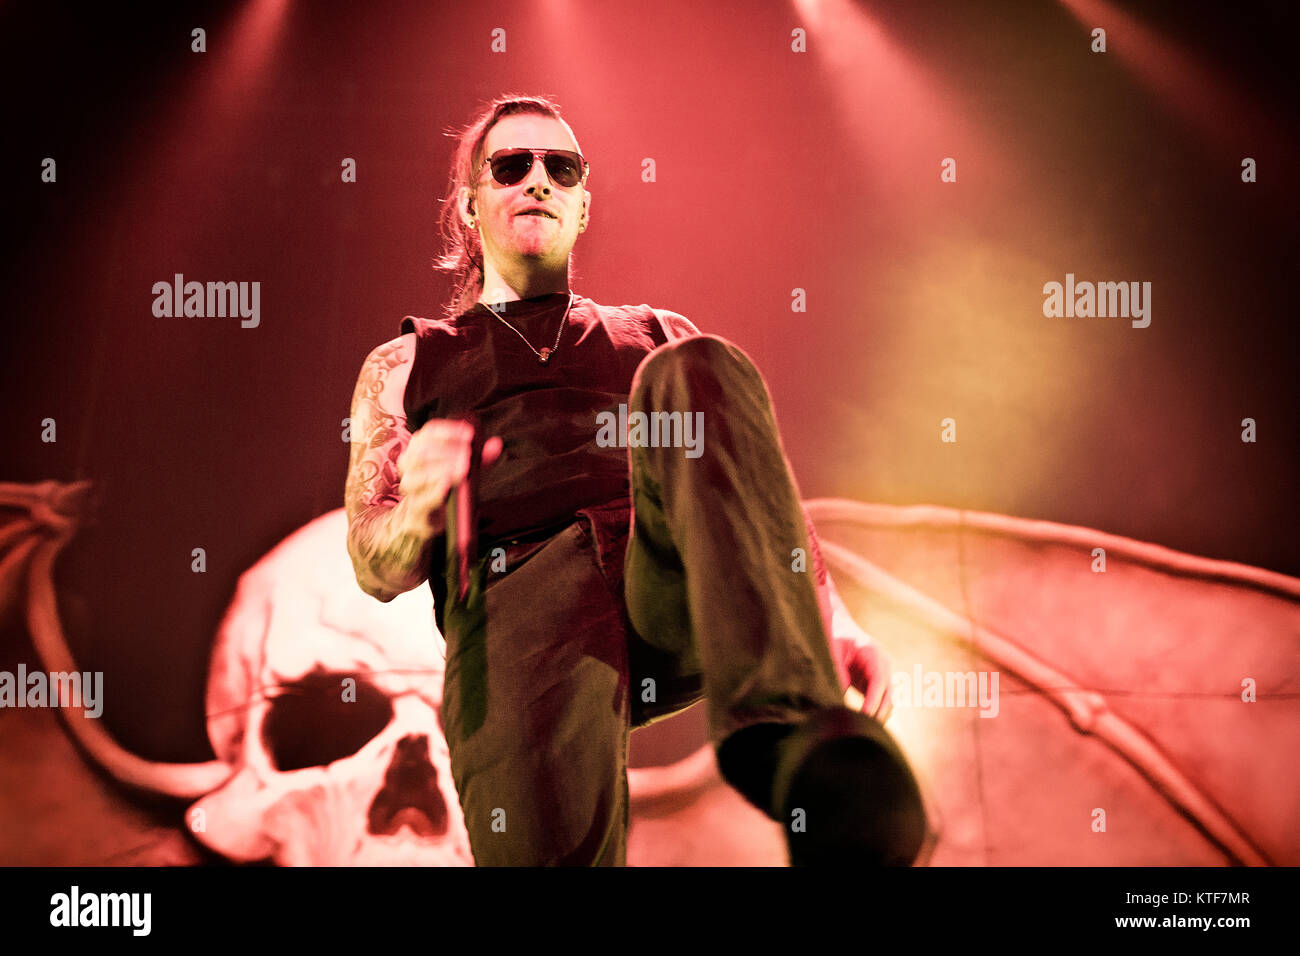 The American heavy metal band Avenged Sevenfold performs a live concert at Oslo Spektrum in Oslo. Here vocalist M. Shadows is seen live on stage. Norway, 09/11 2013. Stock Photo